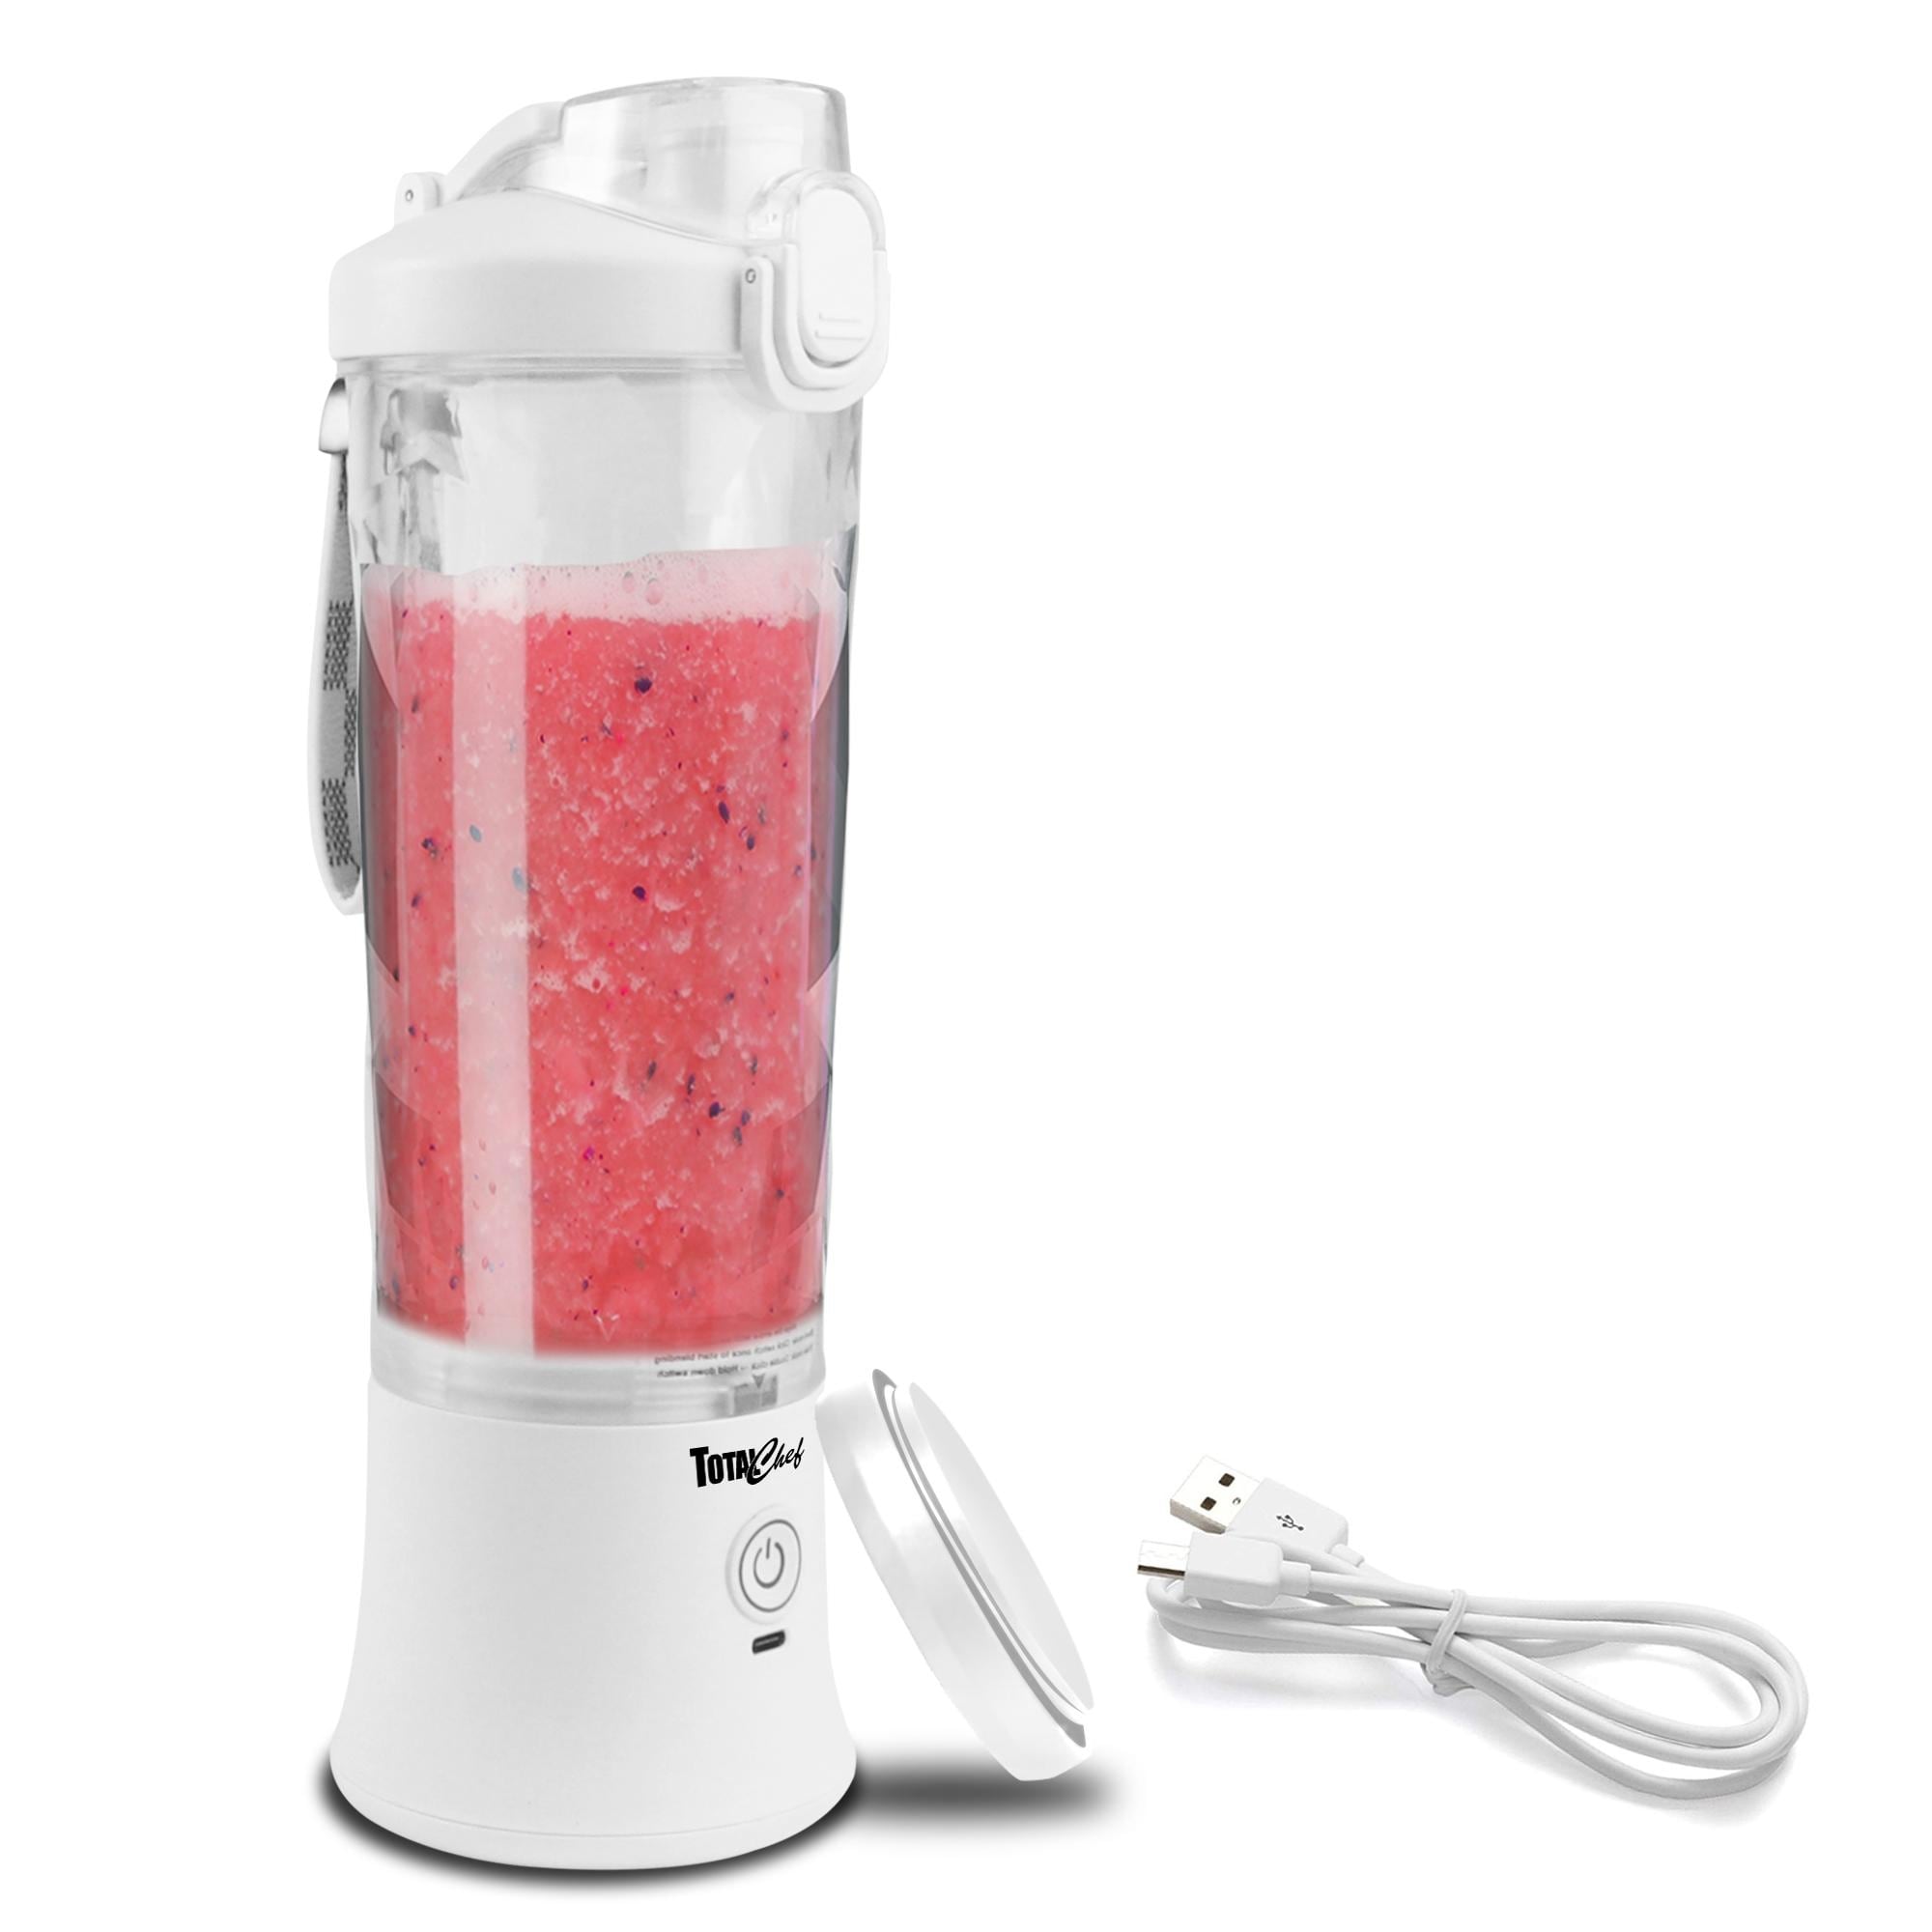 https://ak1.ostkcdn.com/images/products/is/images/direct/70c2807aea87e1bc647500dcb1ace1e12266523f/Total-Chef-Cordless-Portable-Blender%2C-20-oz-%28600-mL%29-Personal-Blender%2C-USB-Rechargeable%2C-White.jpg